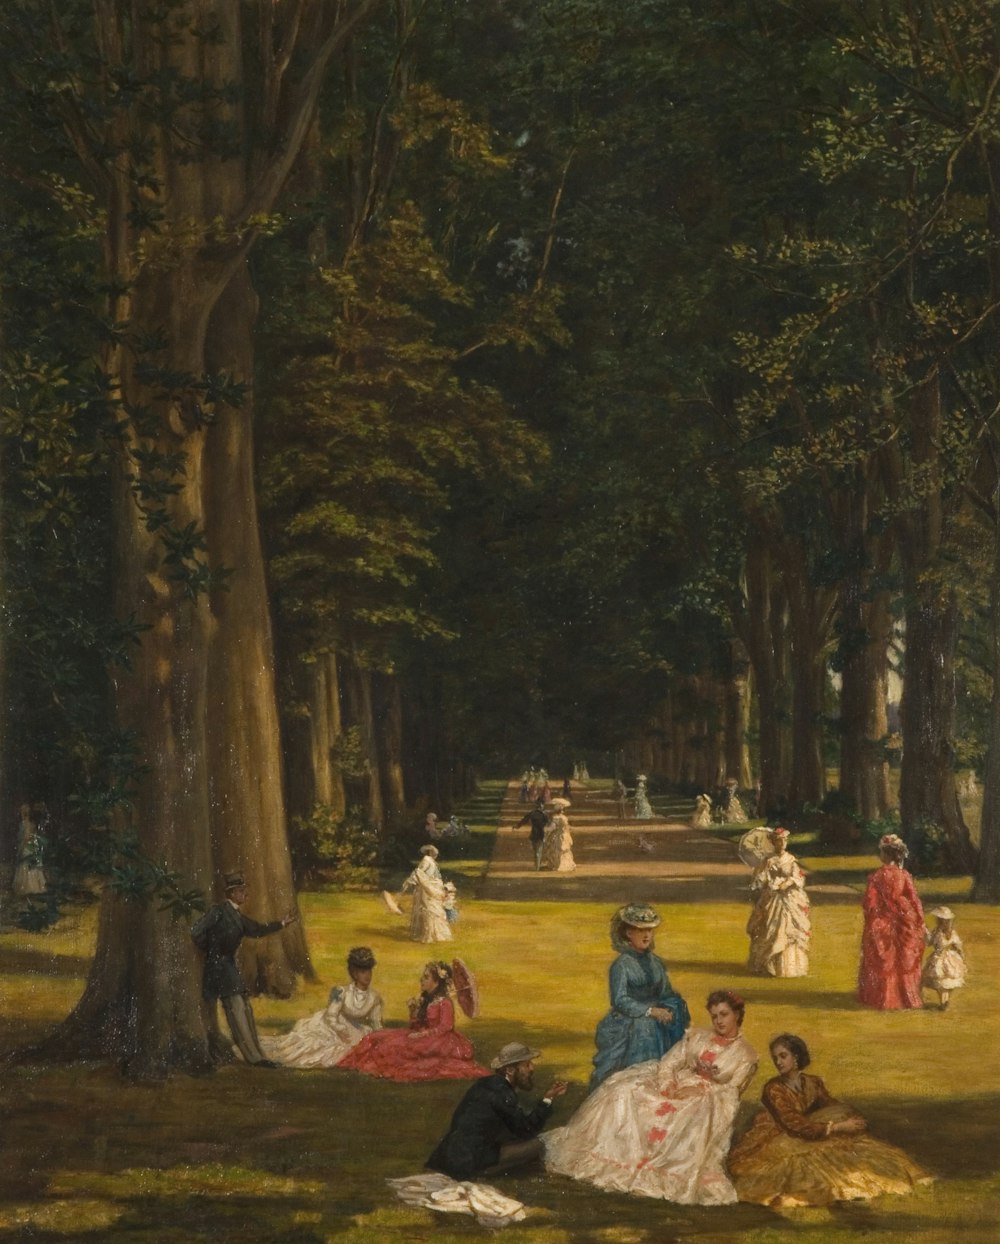 a painting of a group of people in a park